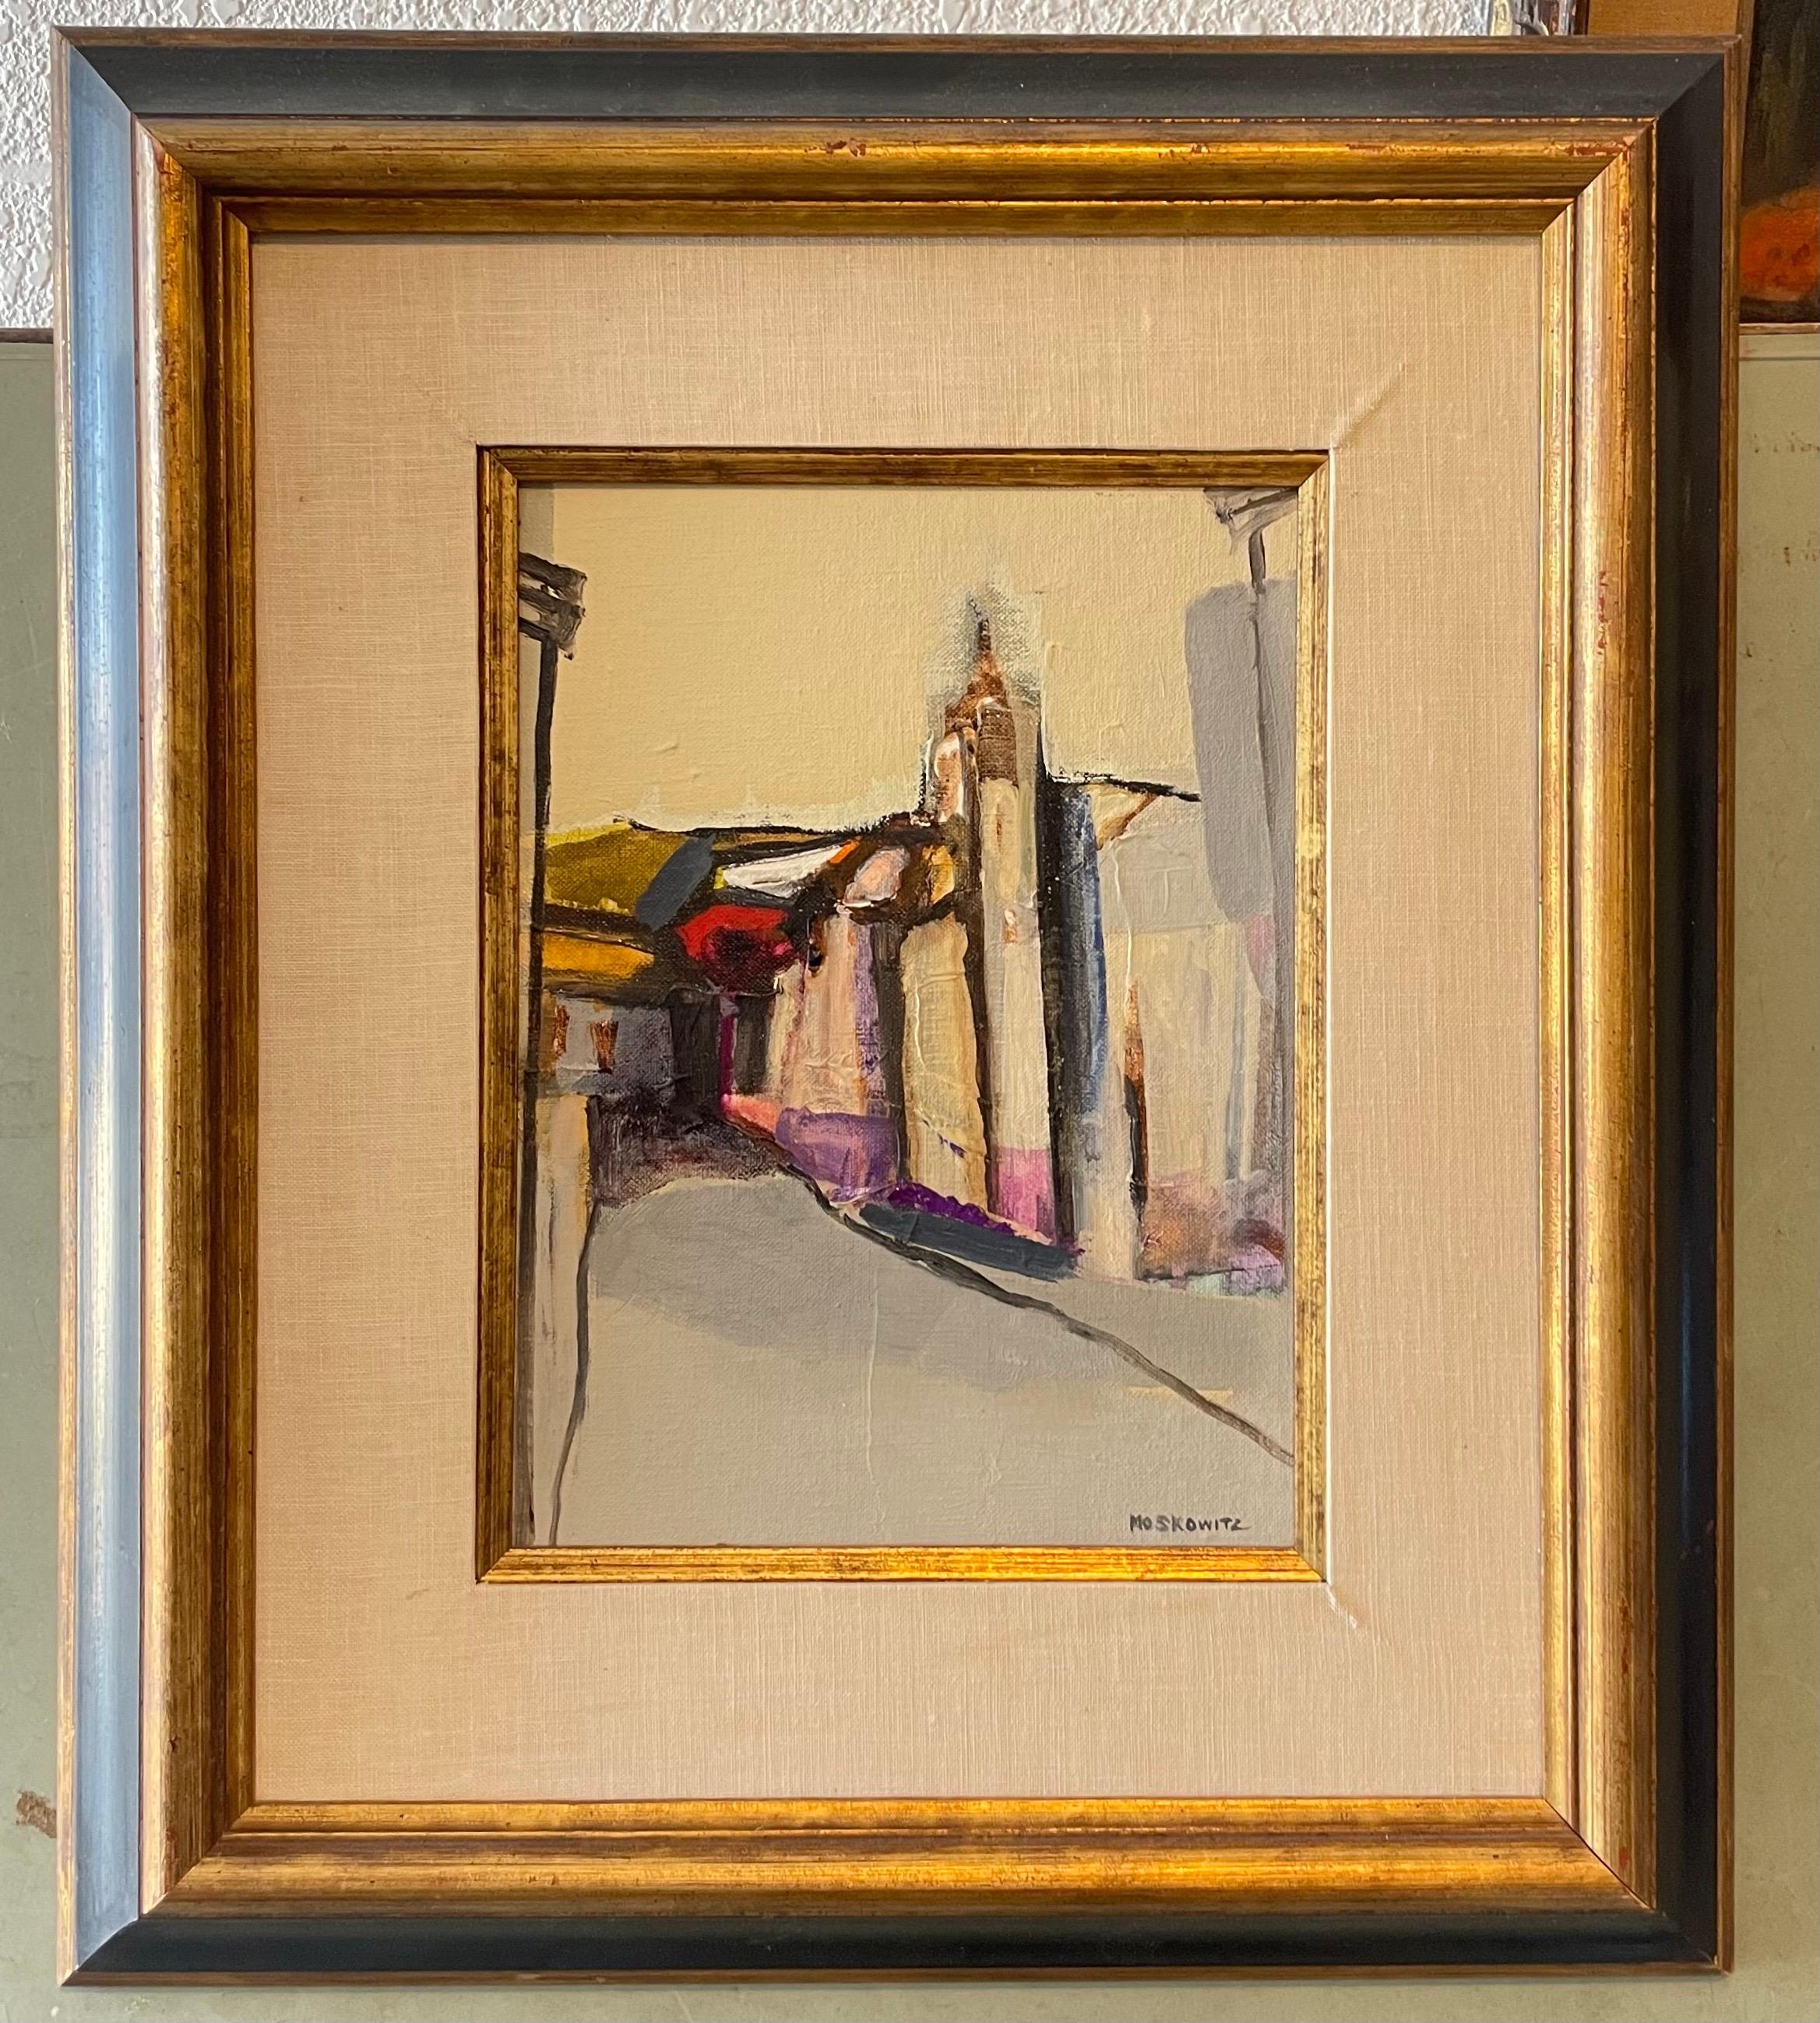 Abstract Oil Painting Expressionist Street Scene Robert Moskowitz New York  5